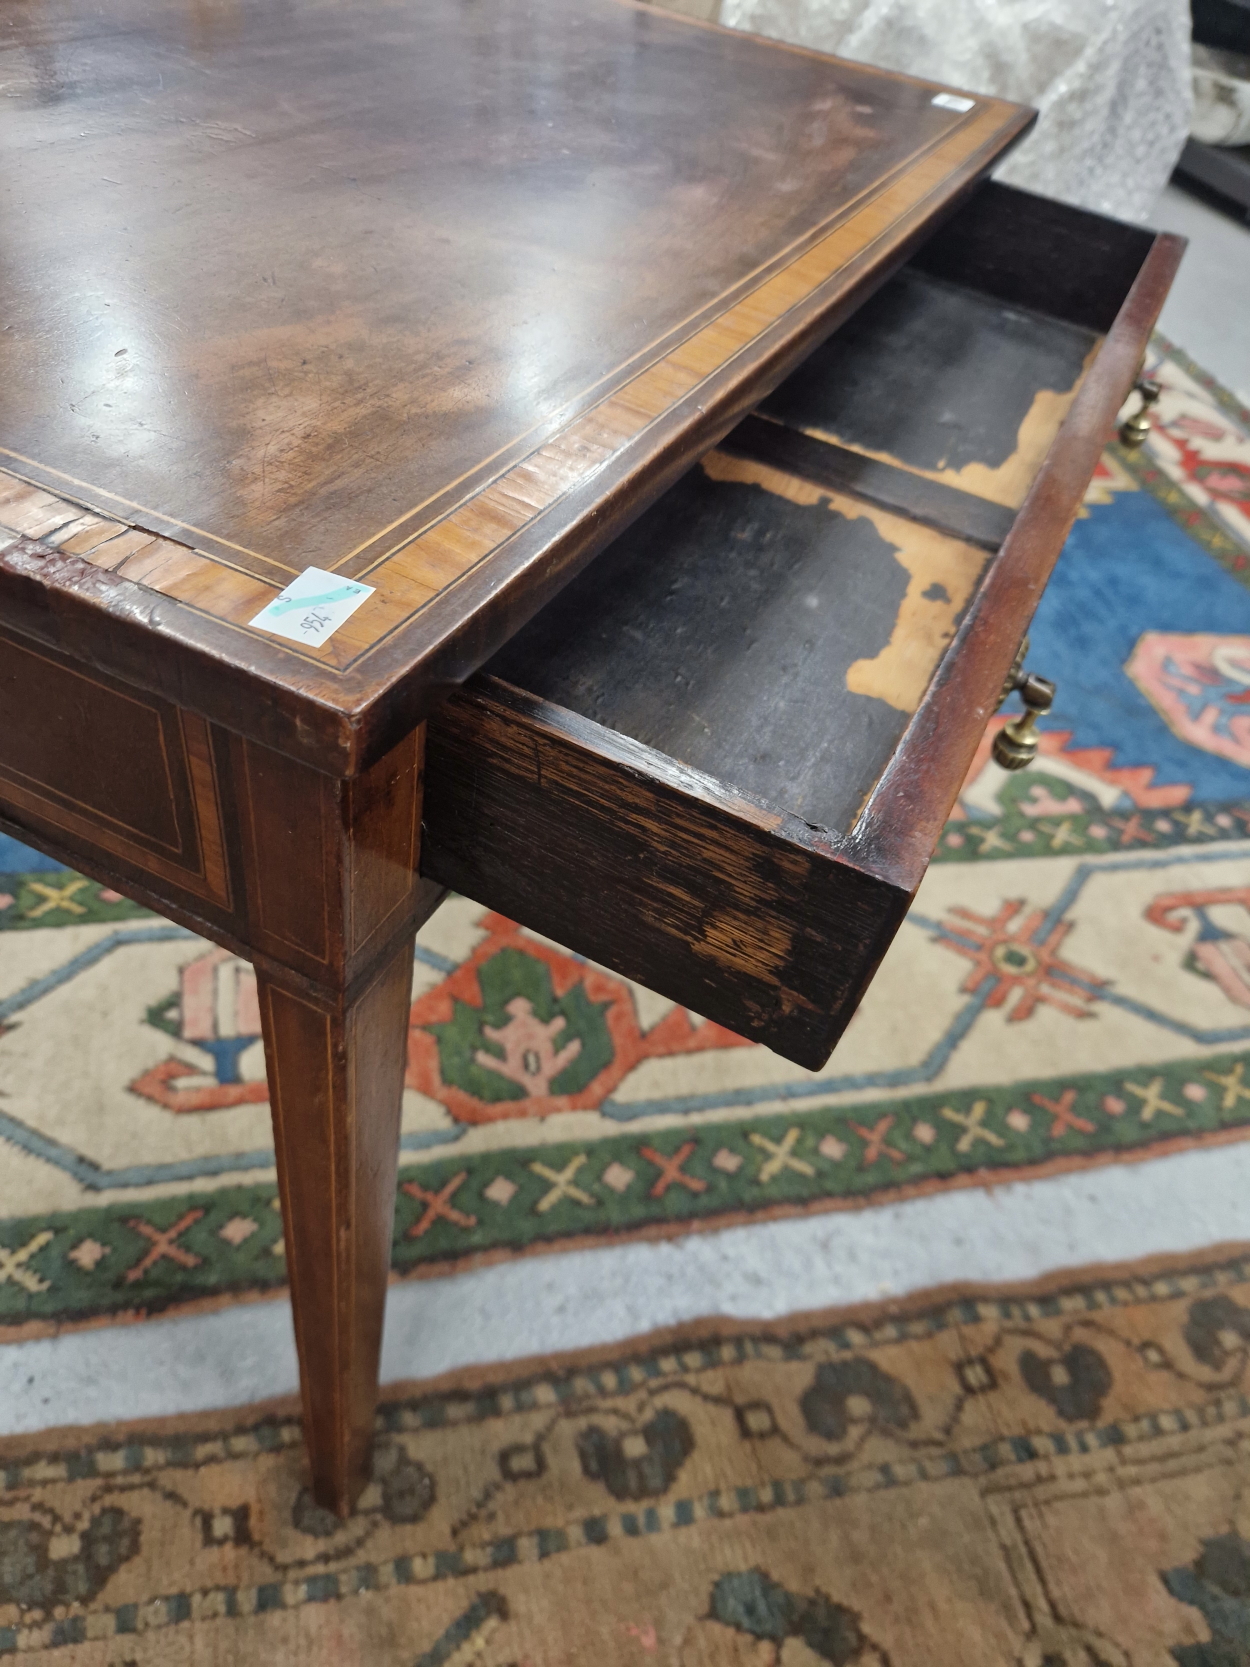 AN ANTIQUE SATIN WOOD BANDED MAHOGANY SIDE TABLE WITH A SINGLE DRAWER ABOVE THE LINE INLAID TAPERING - Image 5 of 5